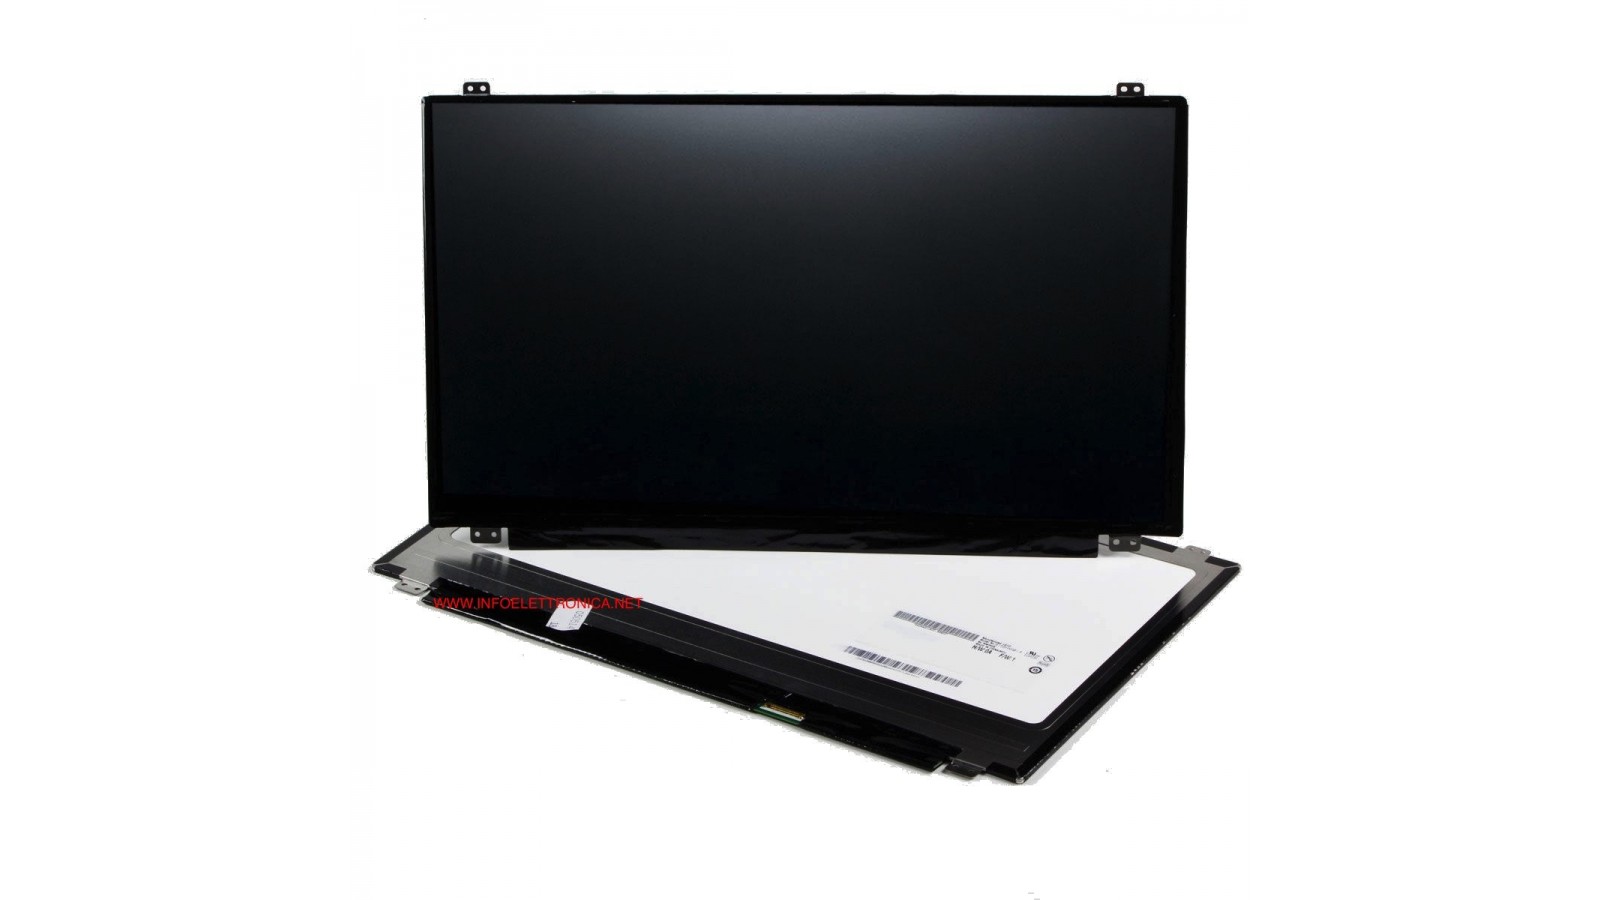 Display LCD Schermo 15,6 Led compatibile con Asus N551V Full Hd